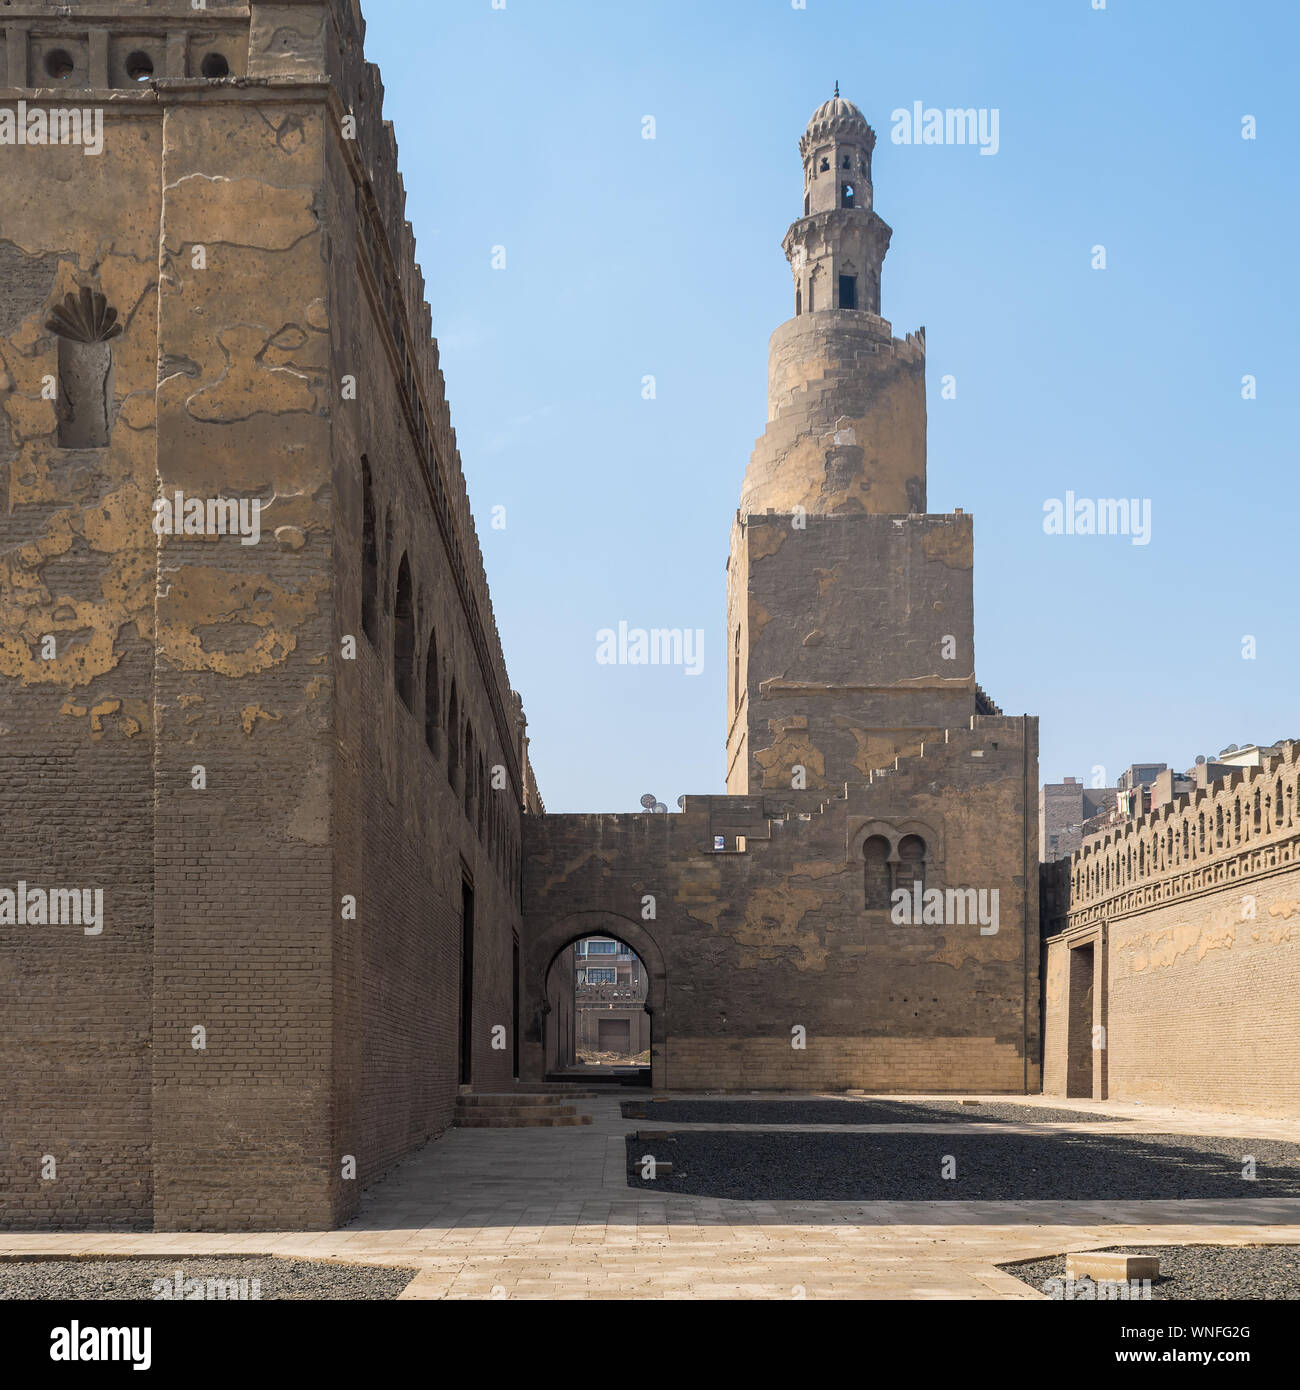 Minaret Ibn Tulun Mosque with helical outer staircase located at Sayyida Zaynab district, Medieval Cairo, Egypt Stock Photo